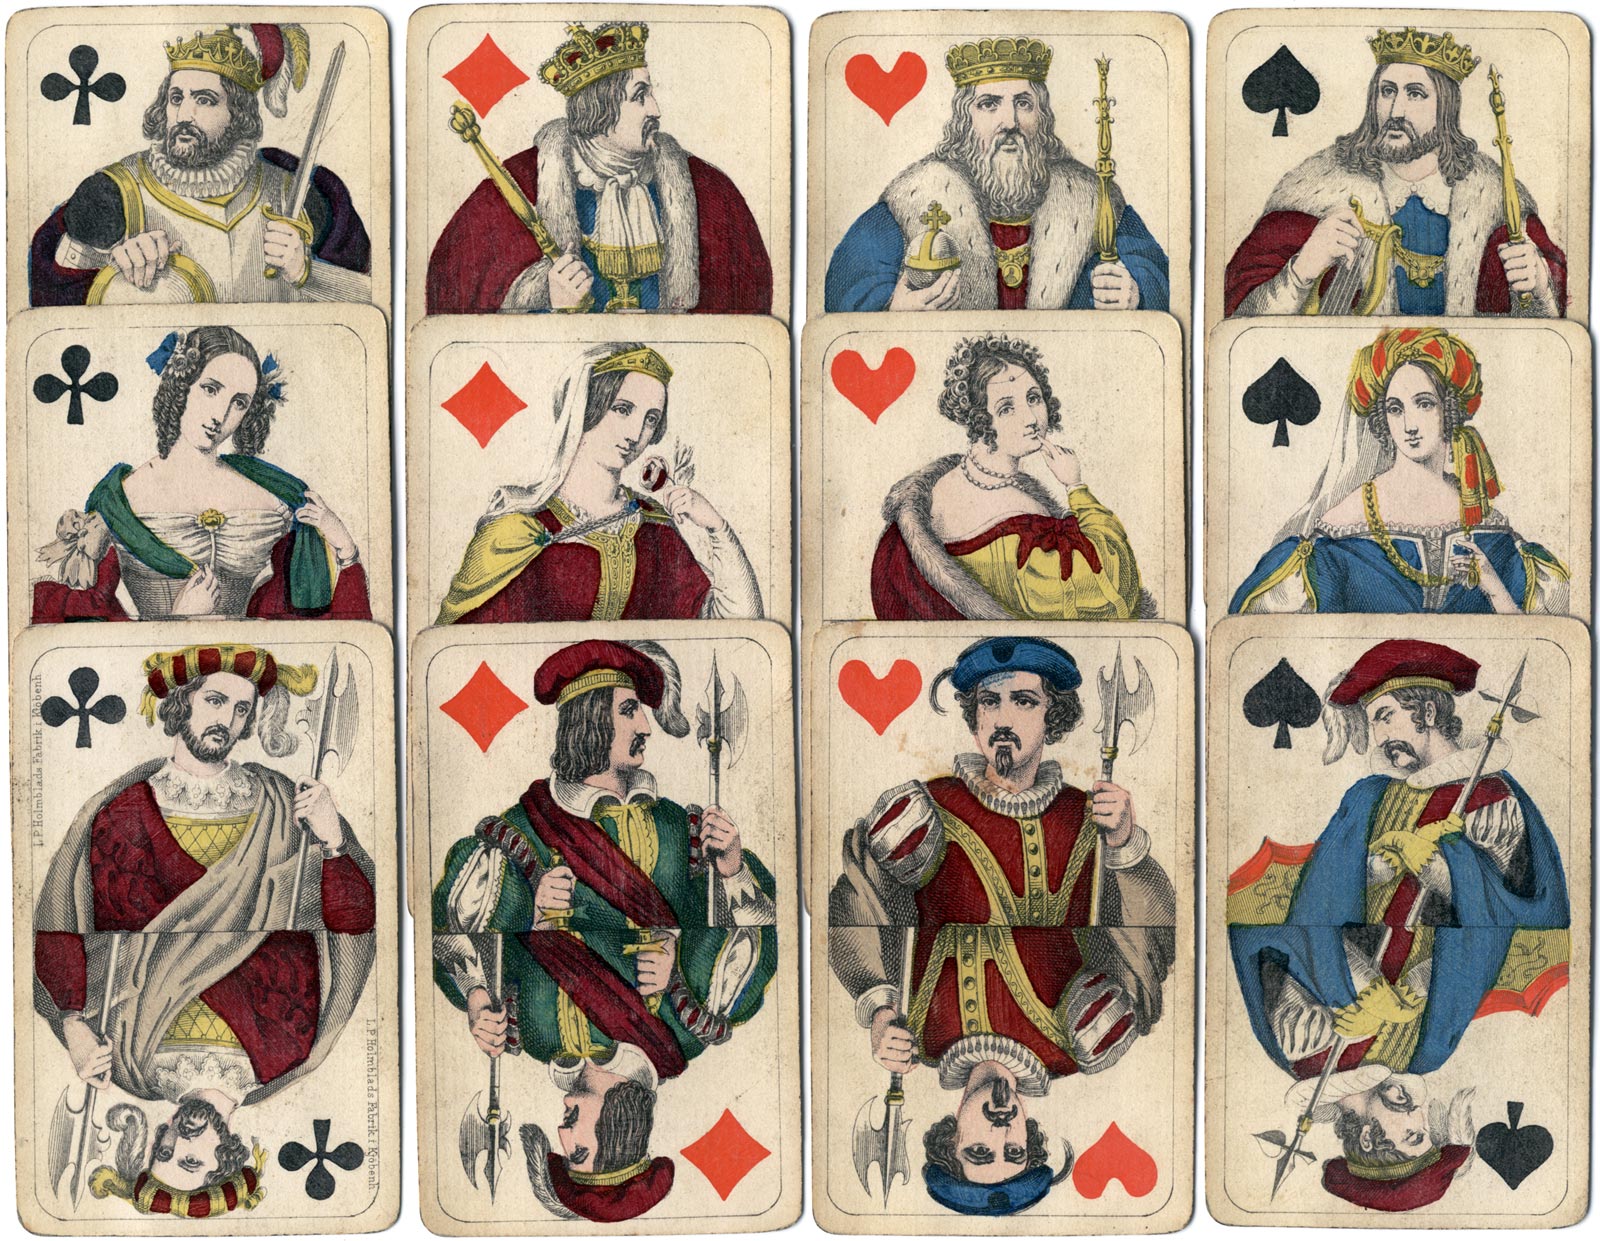 playing cards by L. P. Holmblad c.1840